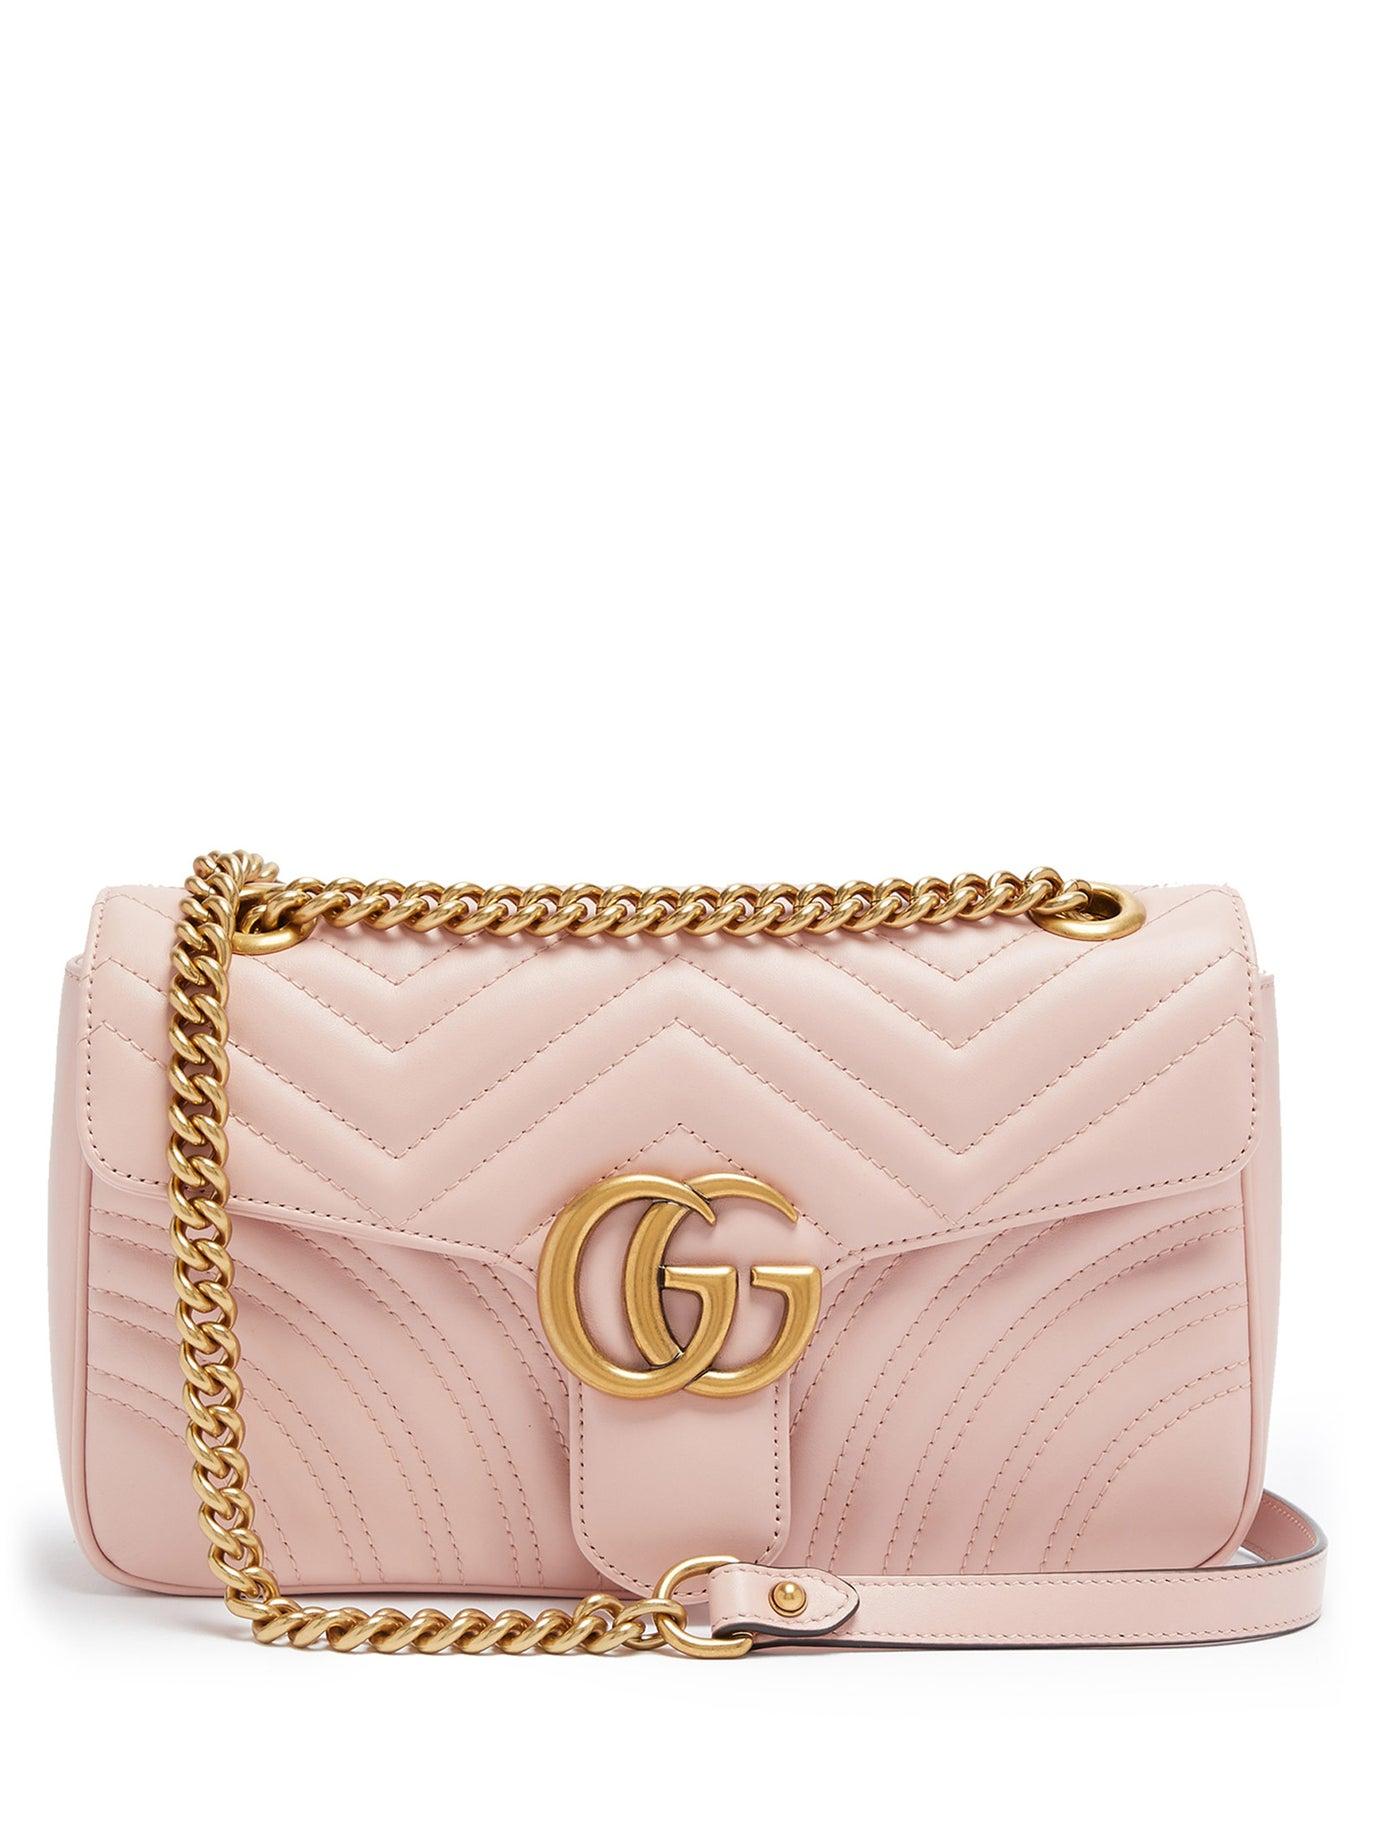 Gucci Gg Marmont Small Quilted-leather Shoulder Bag in Light Pink (Pink) - Save 19% - Lyst